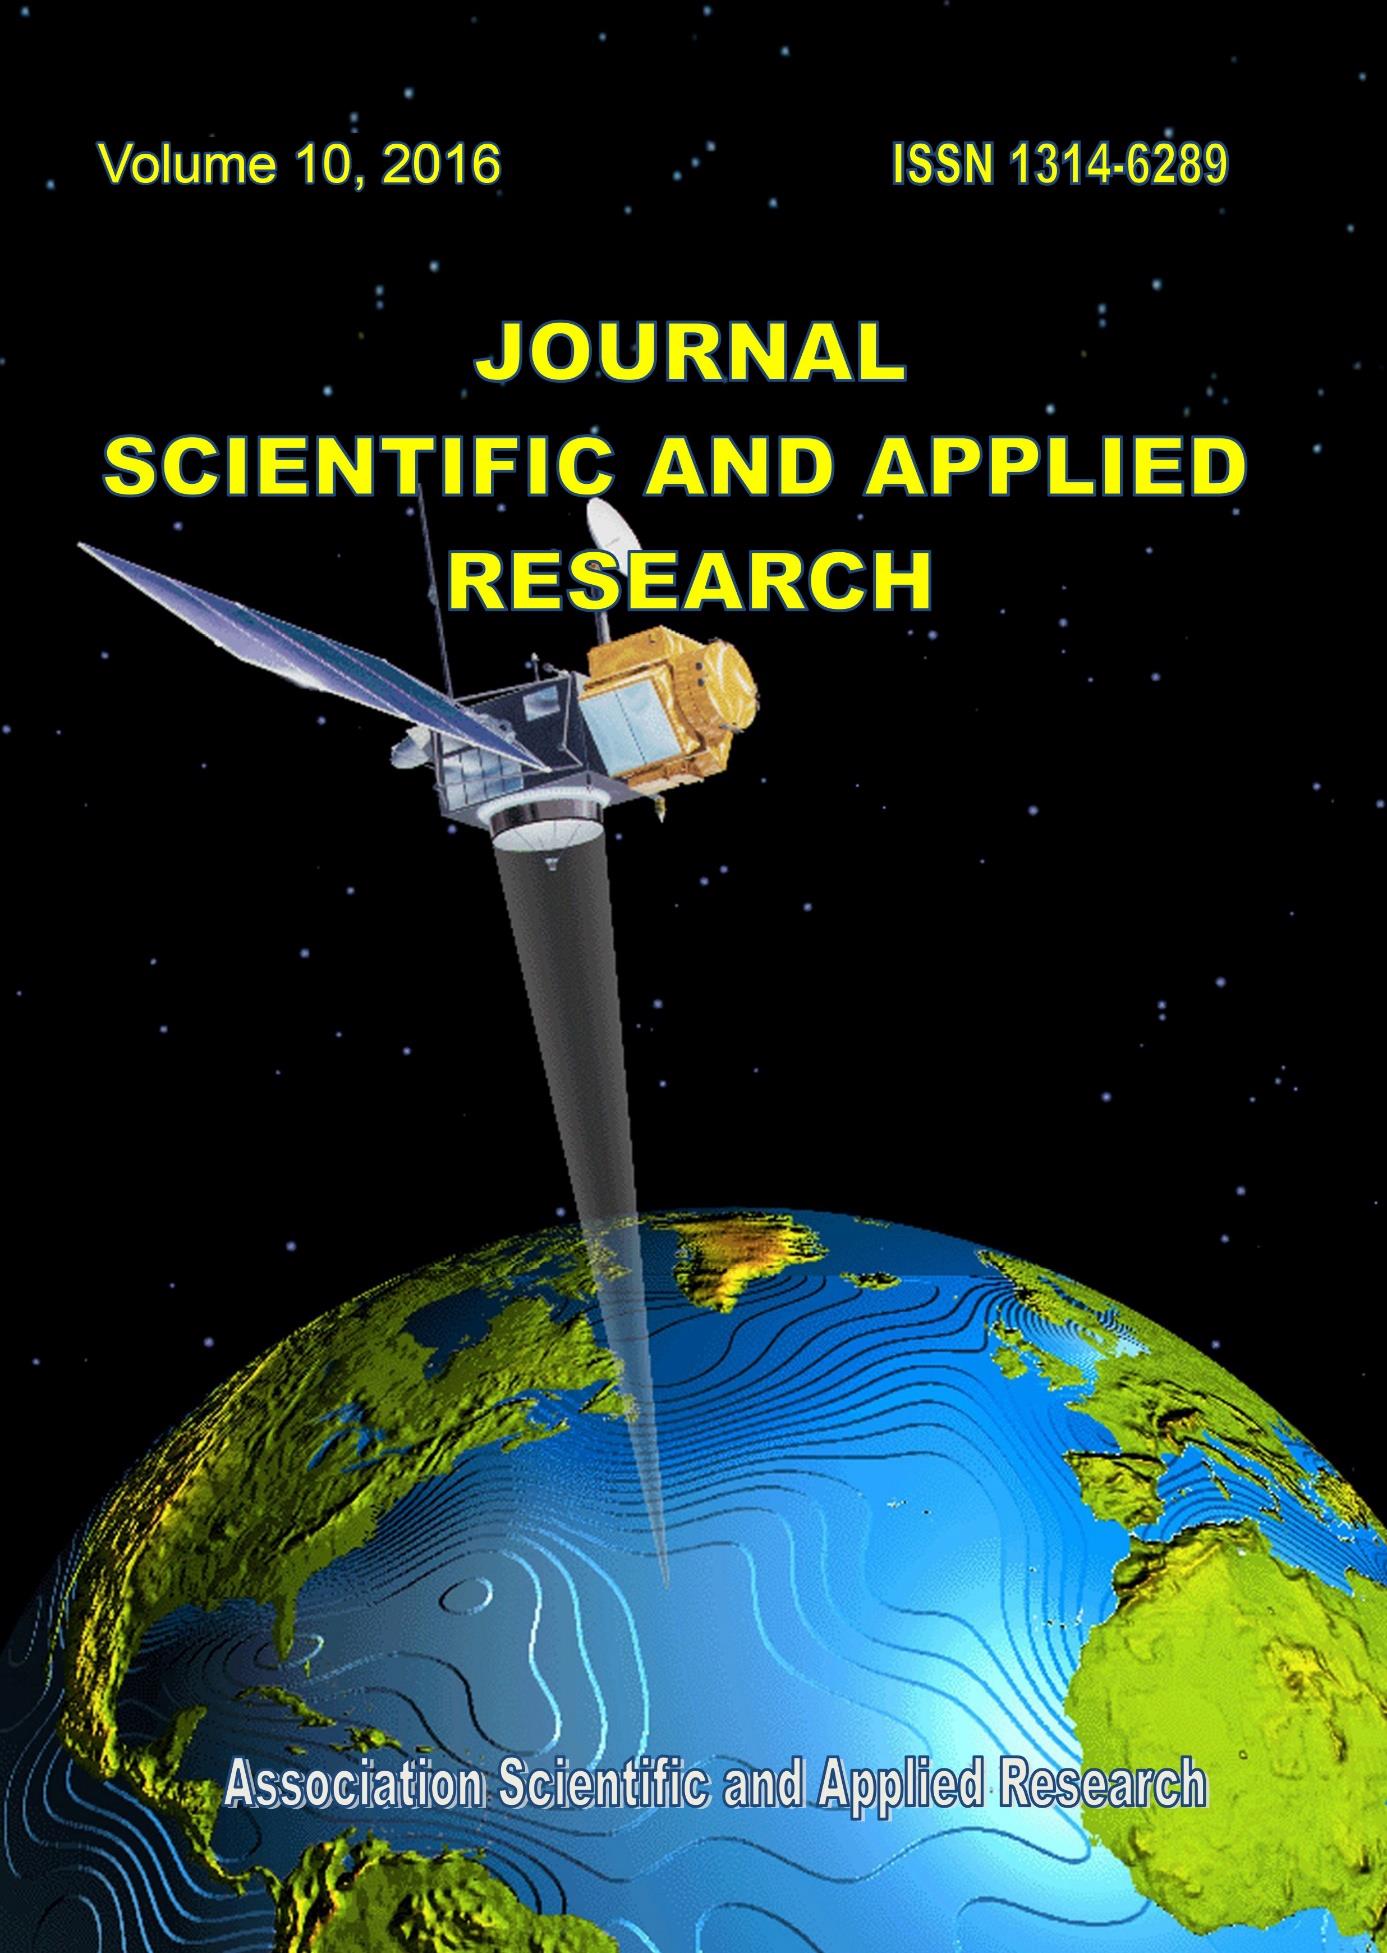 					View Vol. 10 No. 1 (2016): Journal Scientific and Applied Research
				